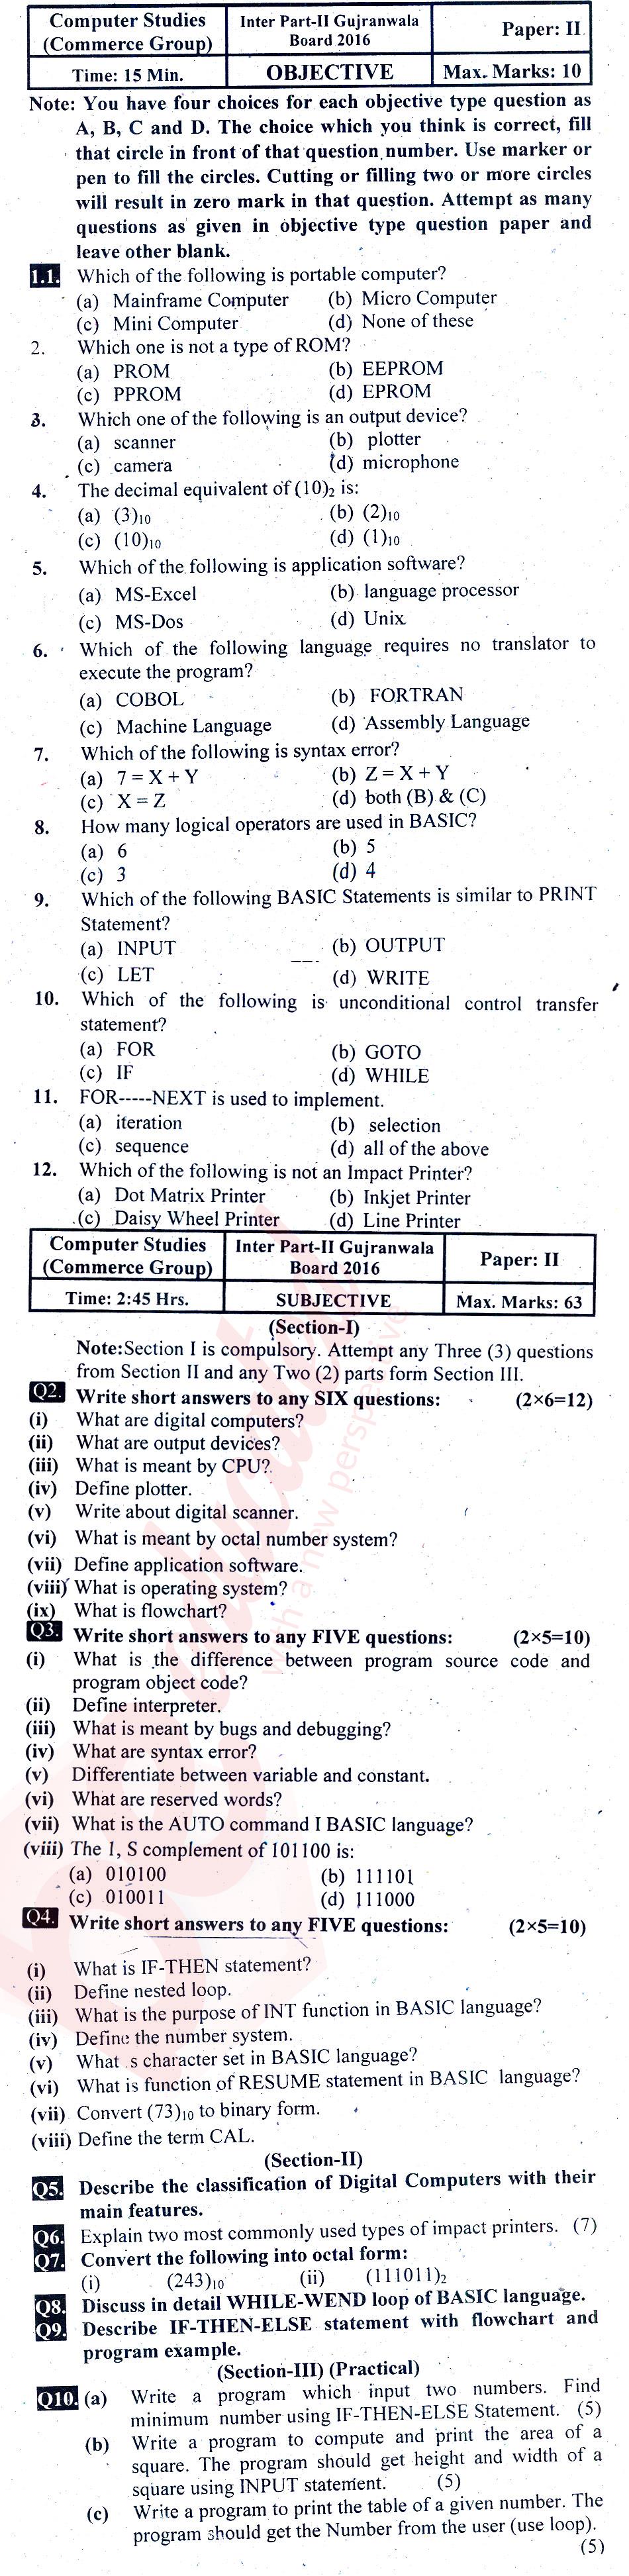 Computer Science ICOM Part 2 Past Paper Group 1 BISE Gujranwala 2016